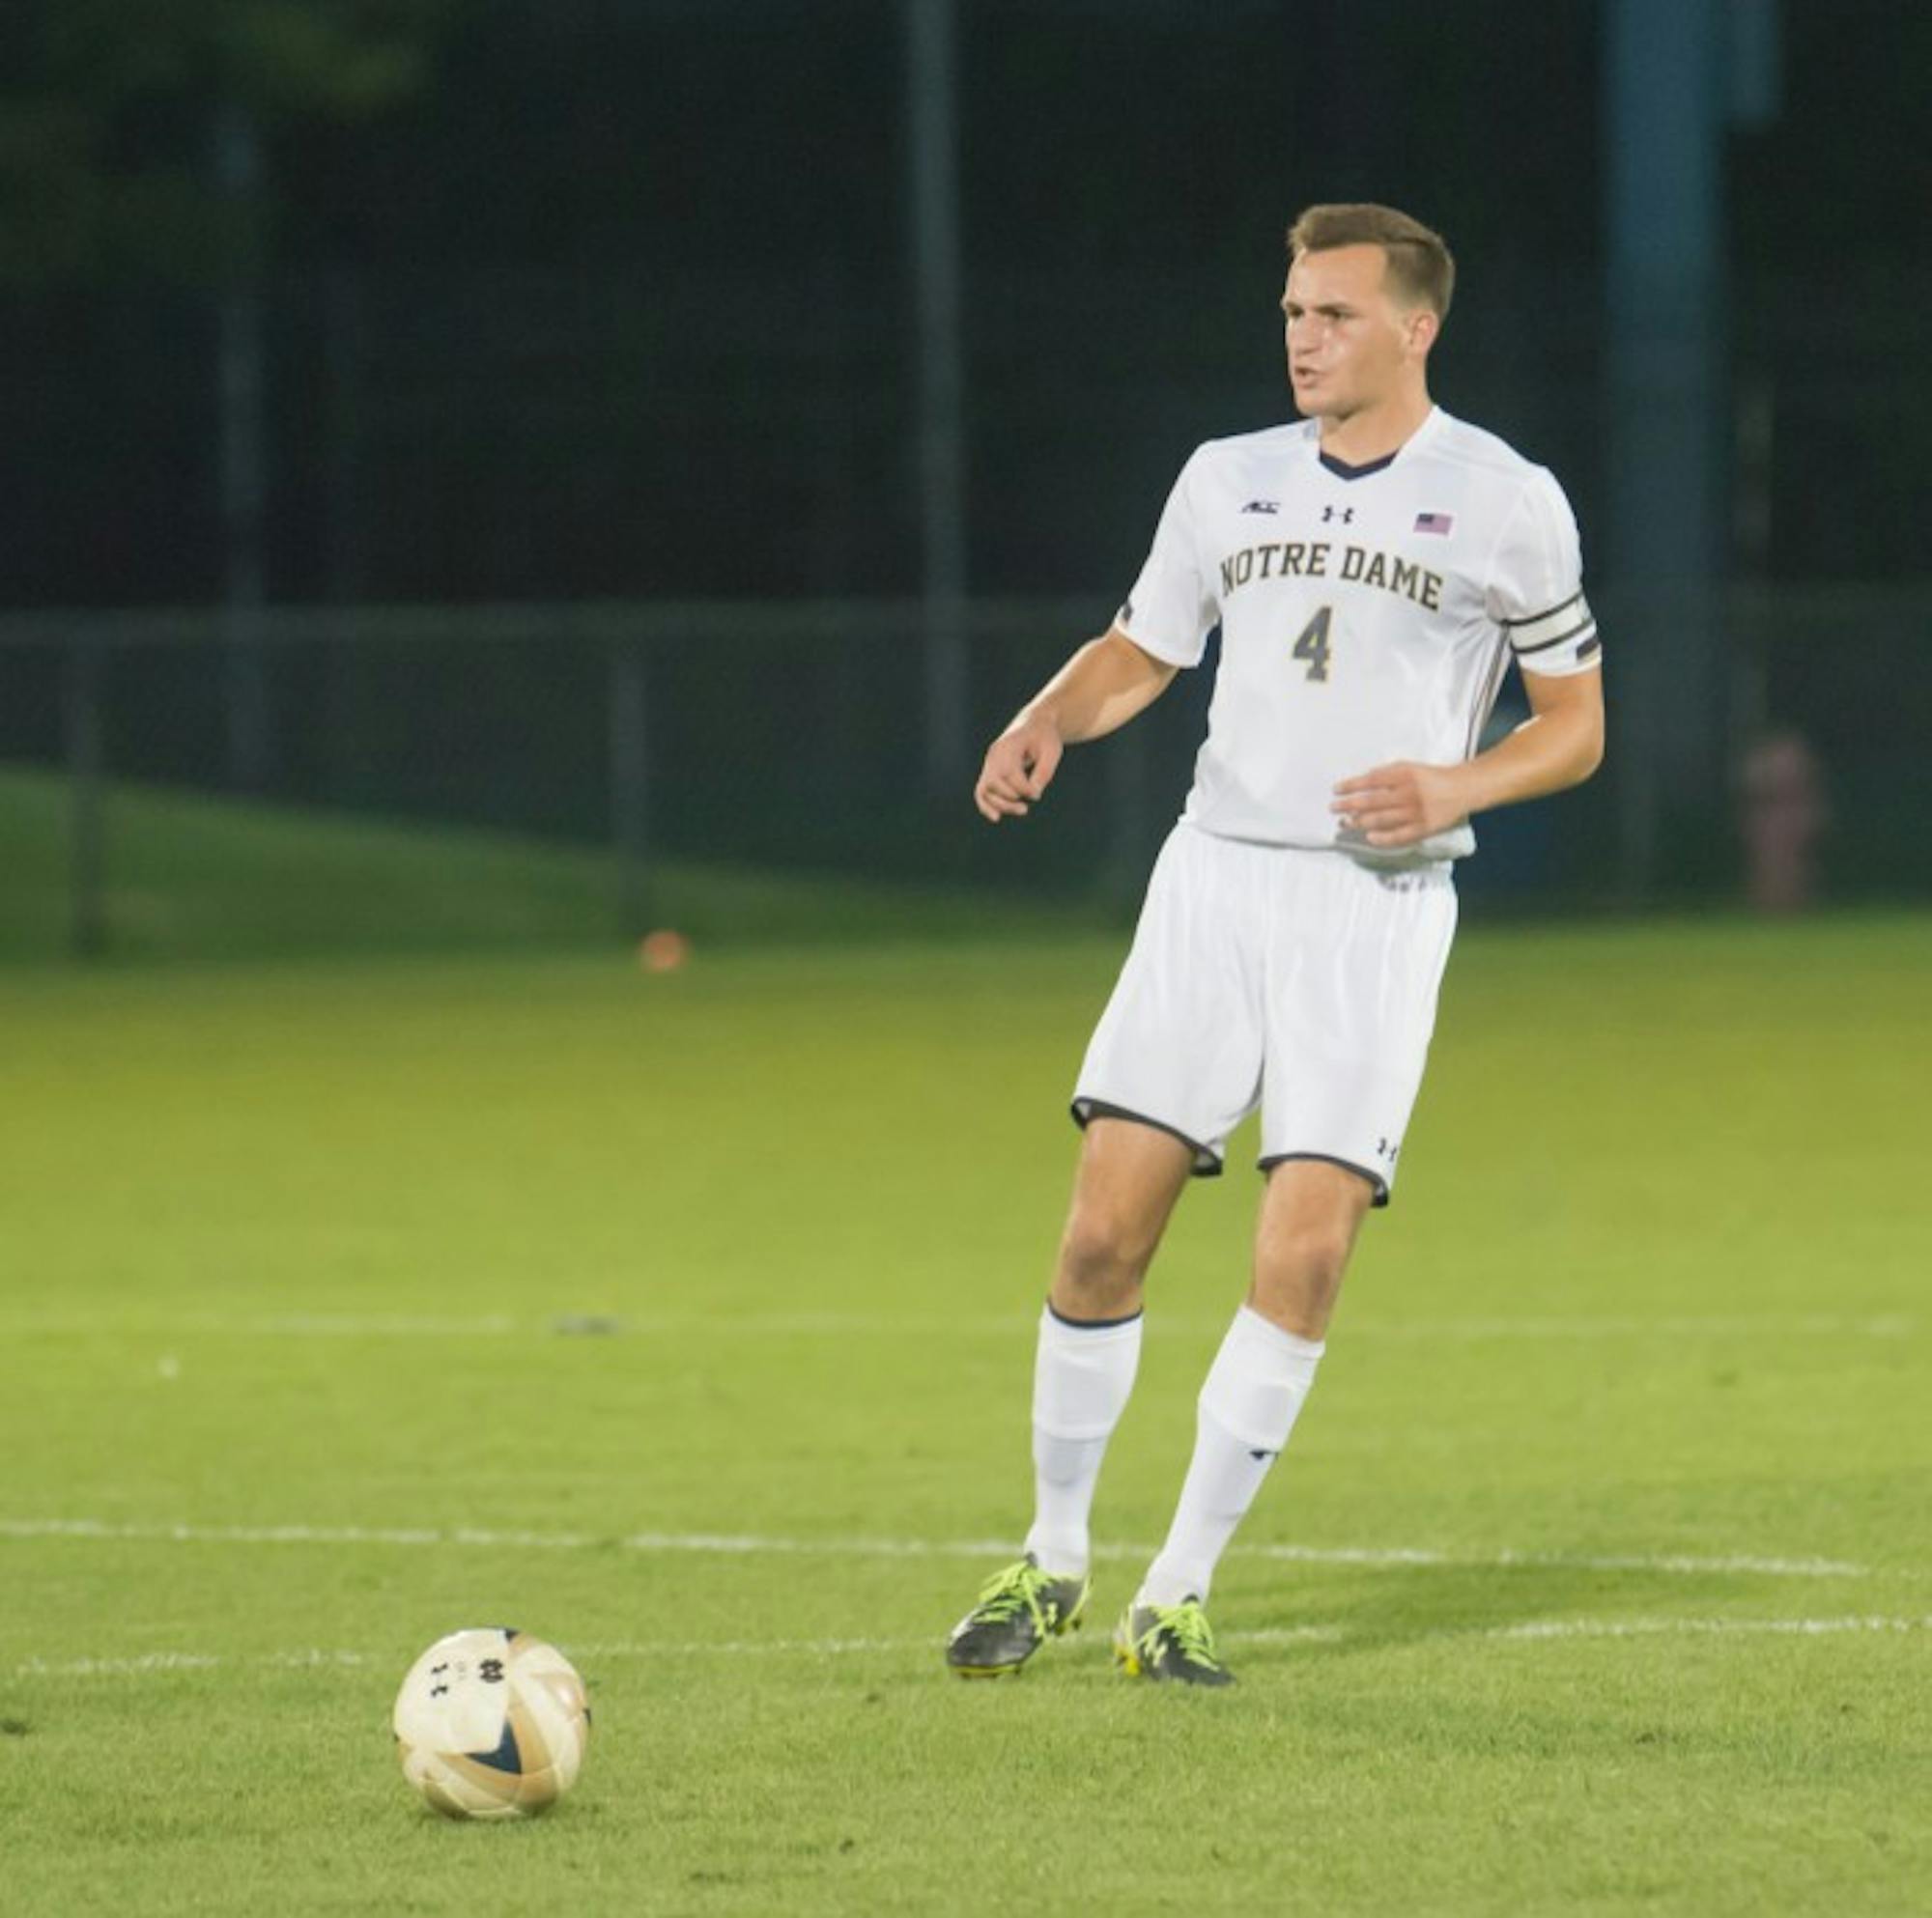 Irish senior defender Matt Habrowski receives a pass during Notre Dame’s 1-0 win over Connecticut on Sept. 13 at Alumni Stadium. Habrowski, a team captain, has started in all seven matches for the Irish this season.